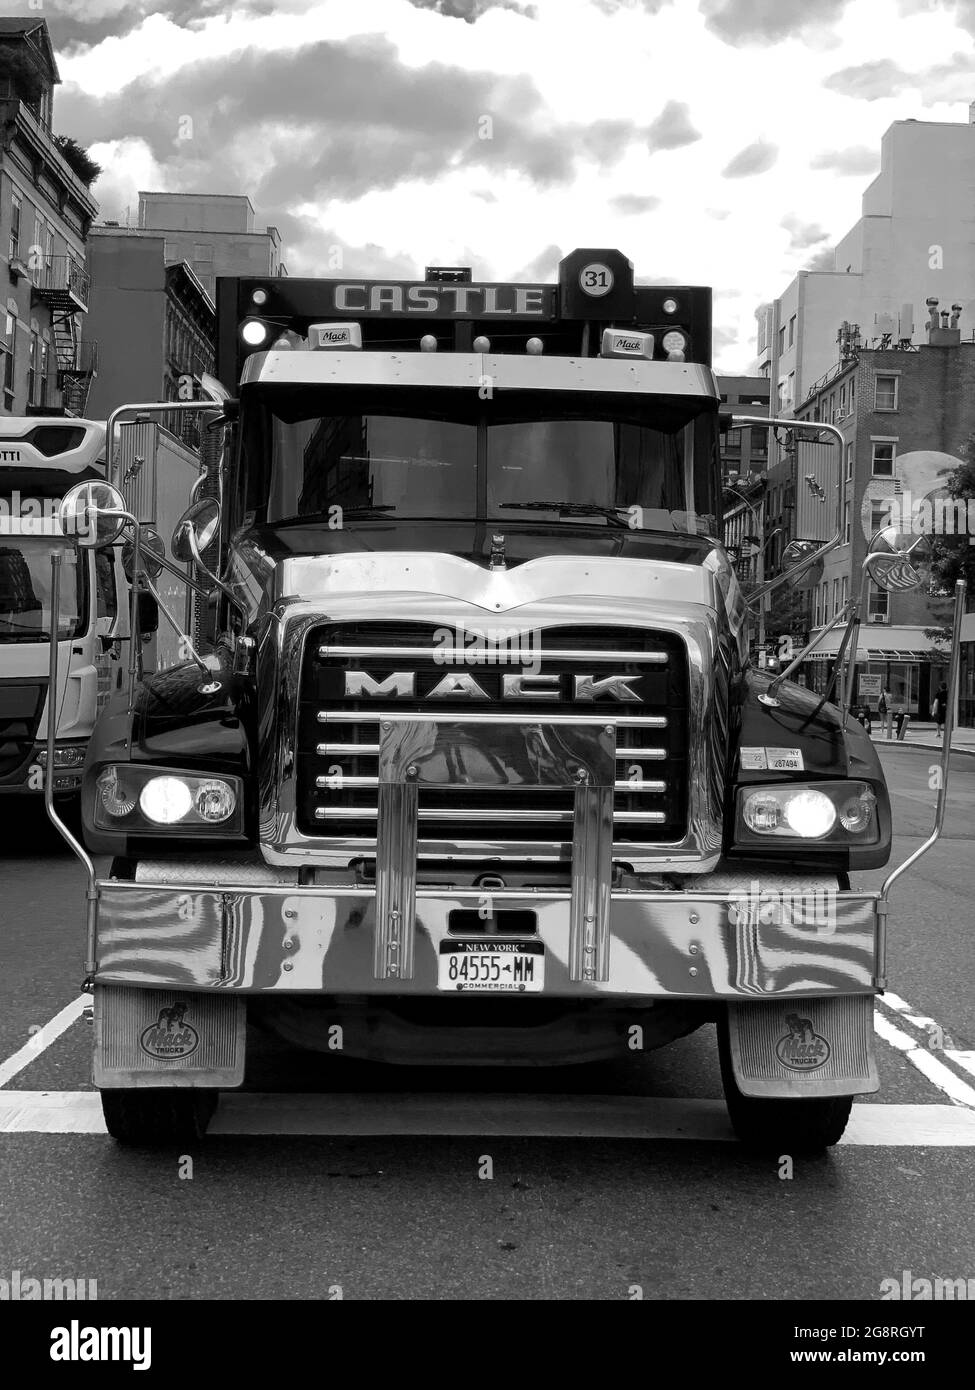 New York, NEW YORK, USA. 19th July, 2021. Mack Trucks, American truck  manufacturing company. Founded in 1900 as the Mack Brothers Company, it  manufactured its first truck in 1907. Mack Trucks is